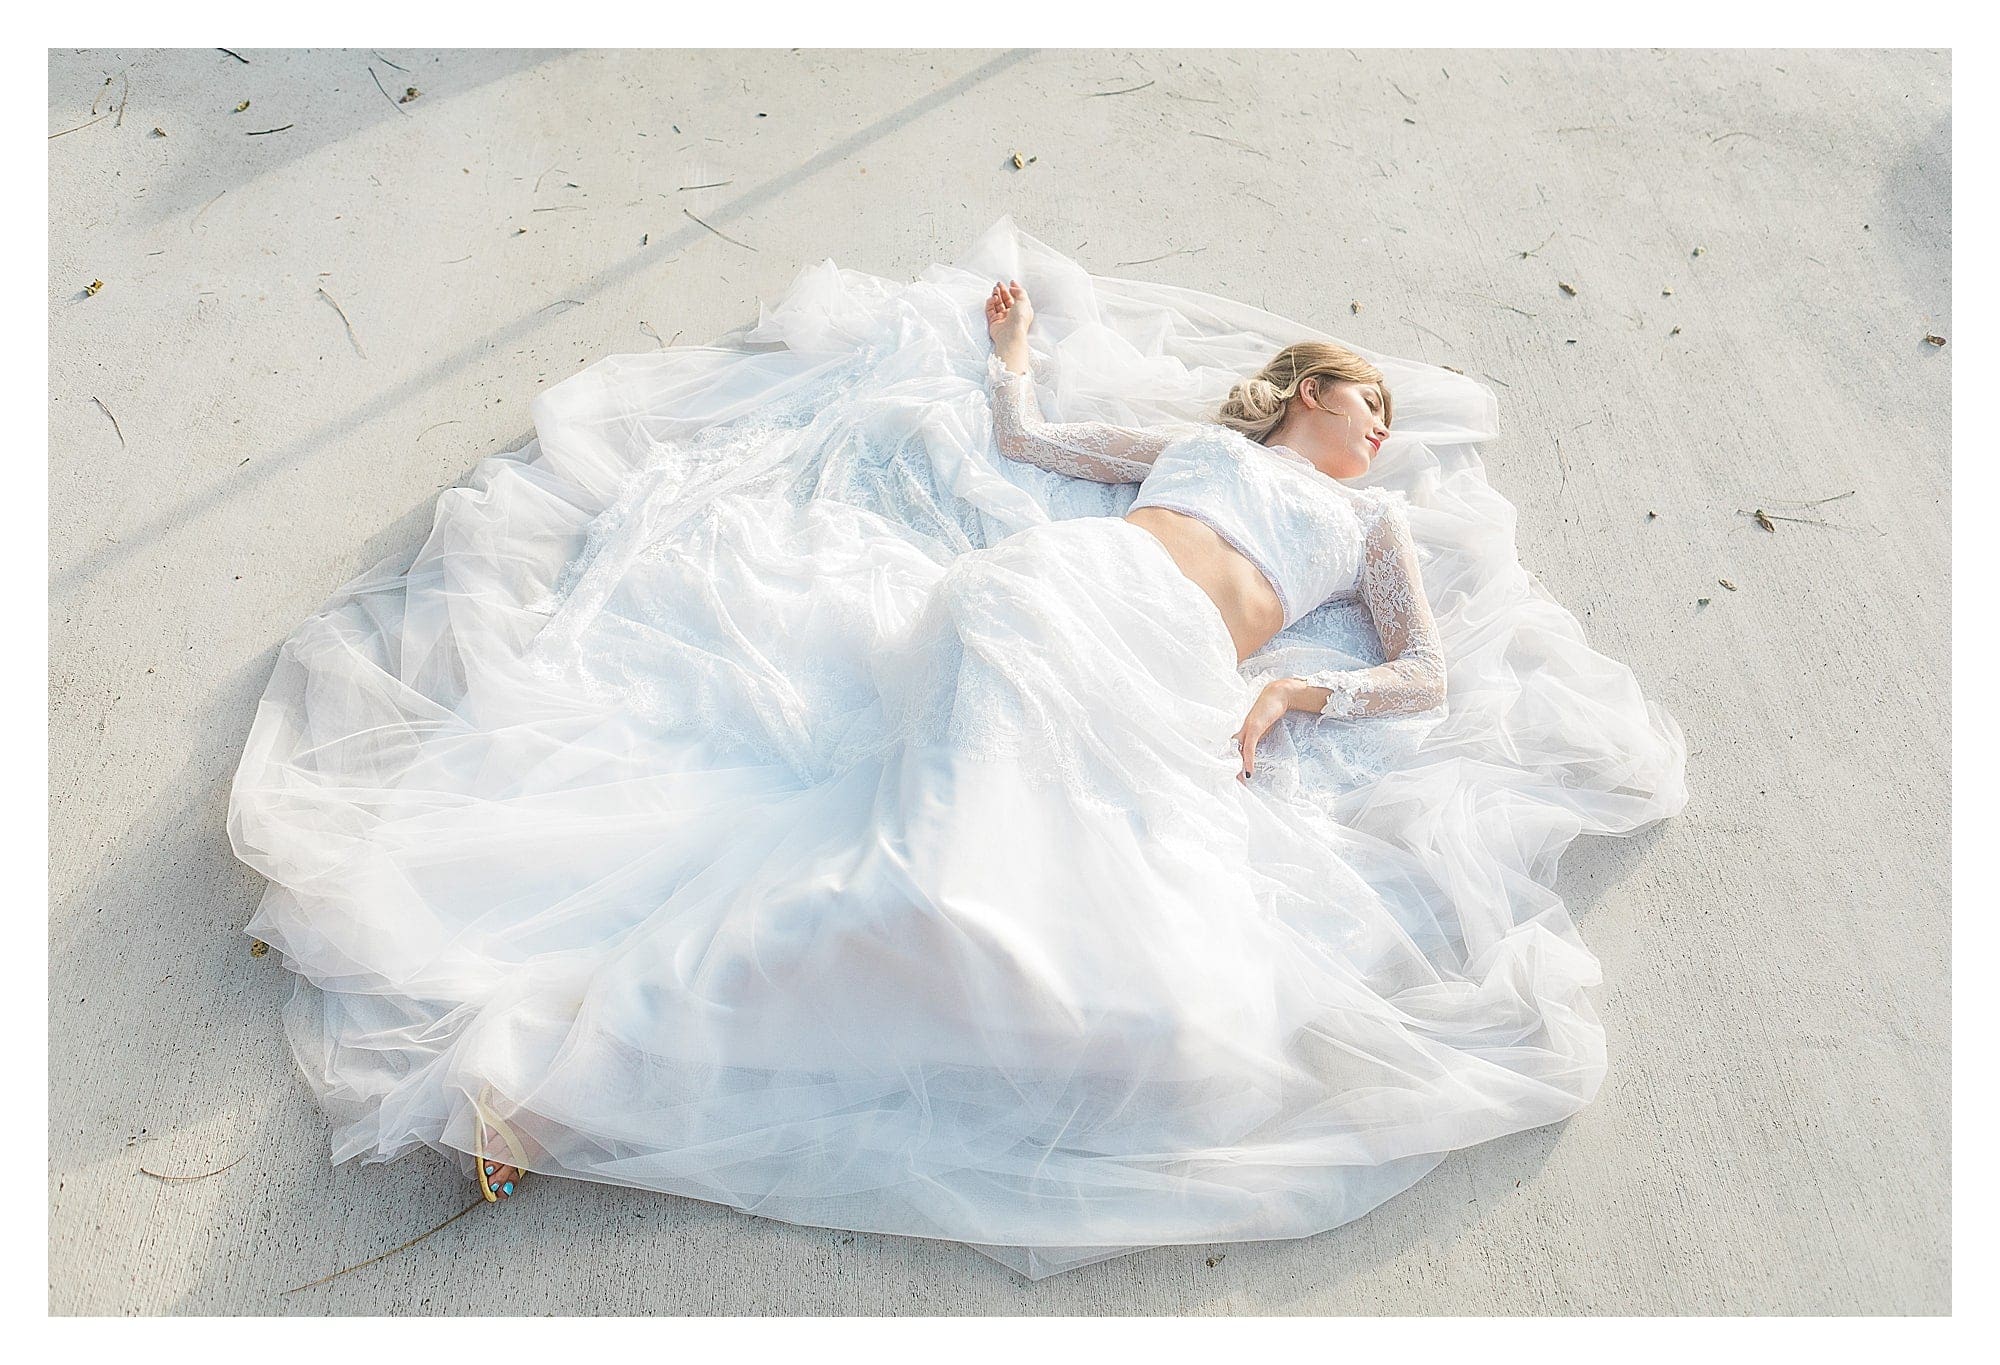 Bride wearing two piece white lace wedding dress laying on concrete posing